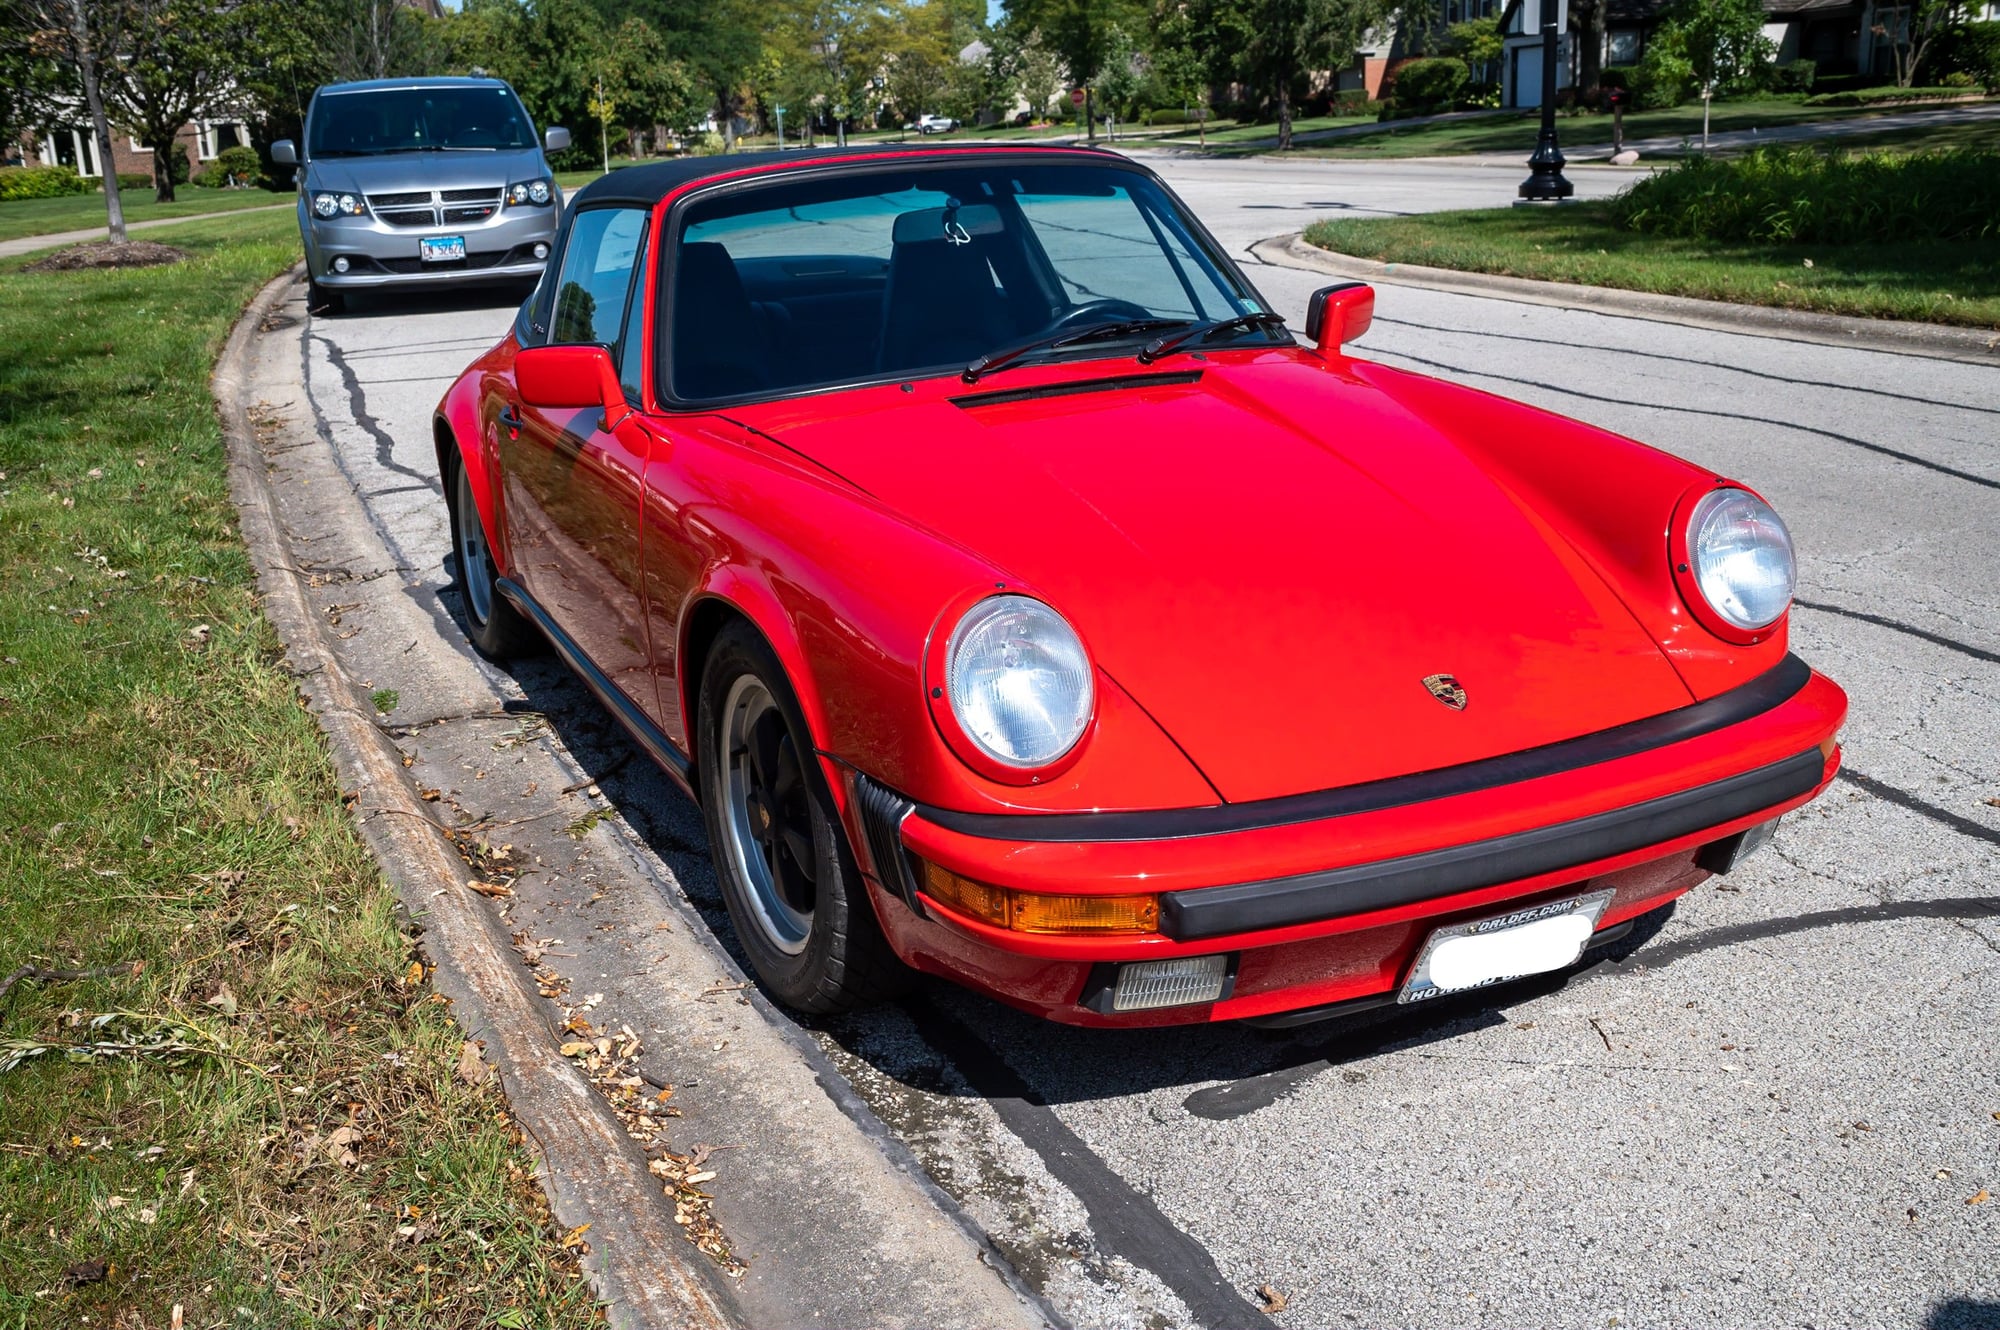 1988 Porsche 911 - 1988 Porsche 911 Targa One Owner 44,826miles - Used - VIN WP0EB091XJS161134 - 44,826 Miles - 6 cyl - 2WD - Manual - Convertible - Red - Northbrook, IL 60062, United States